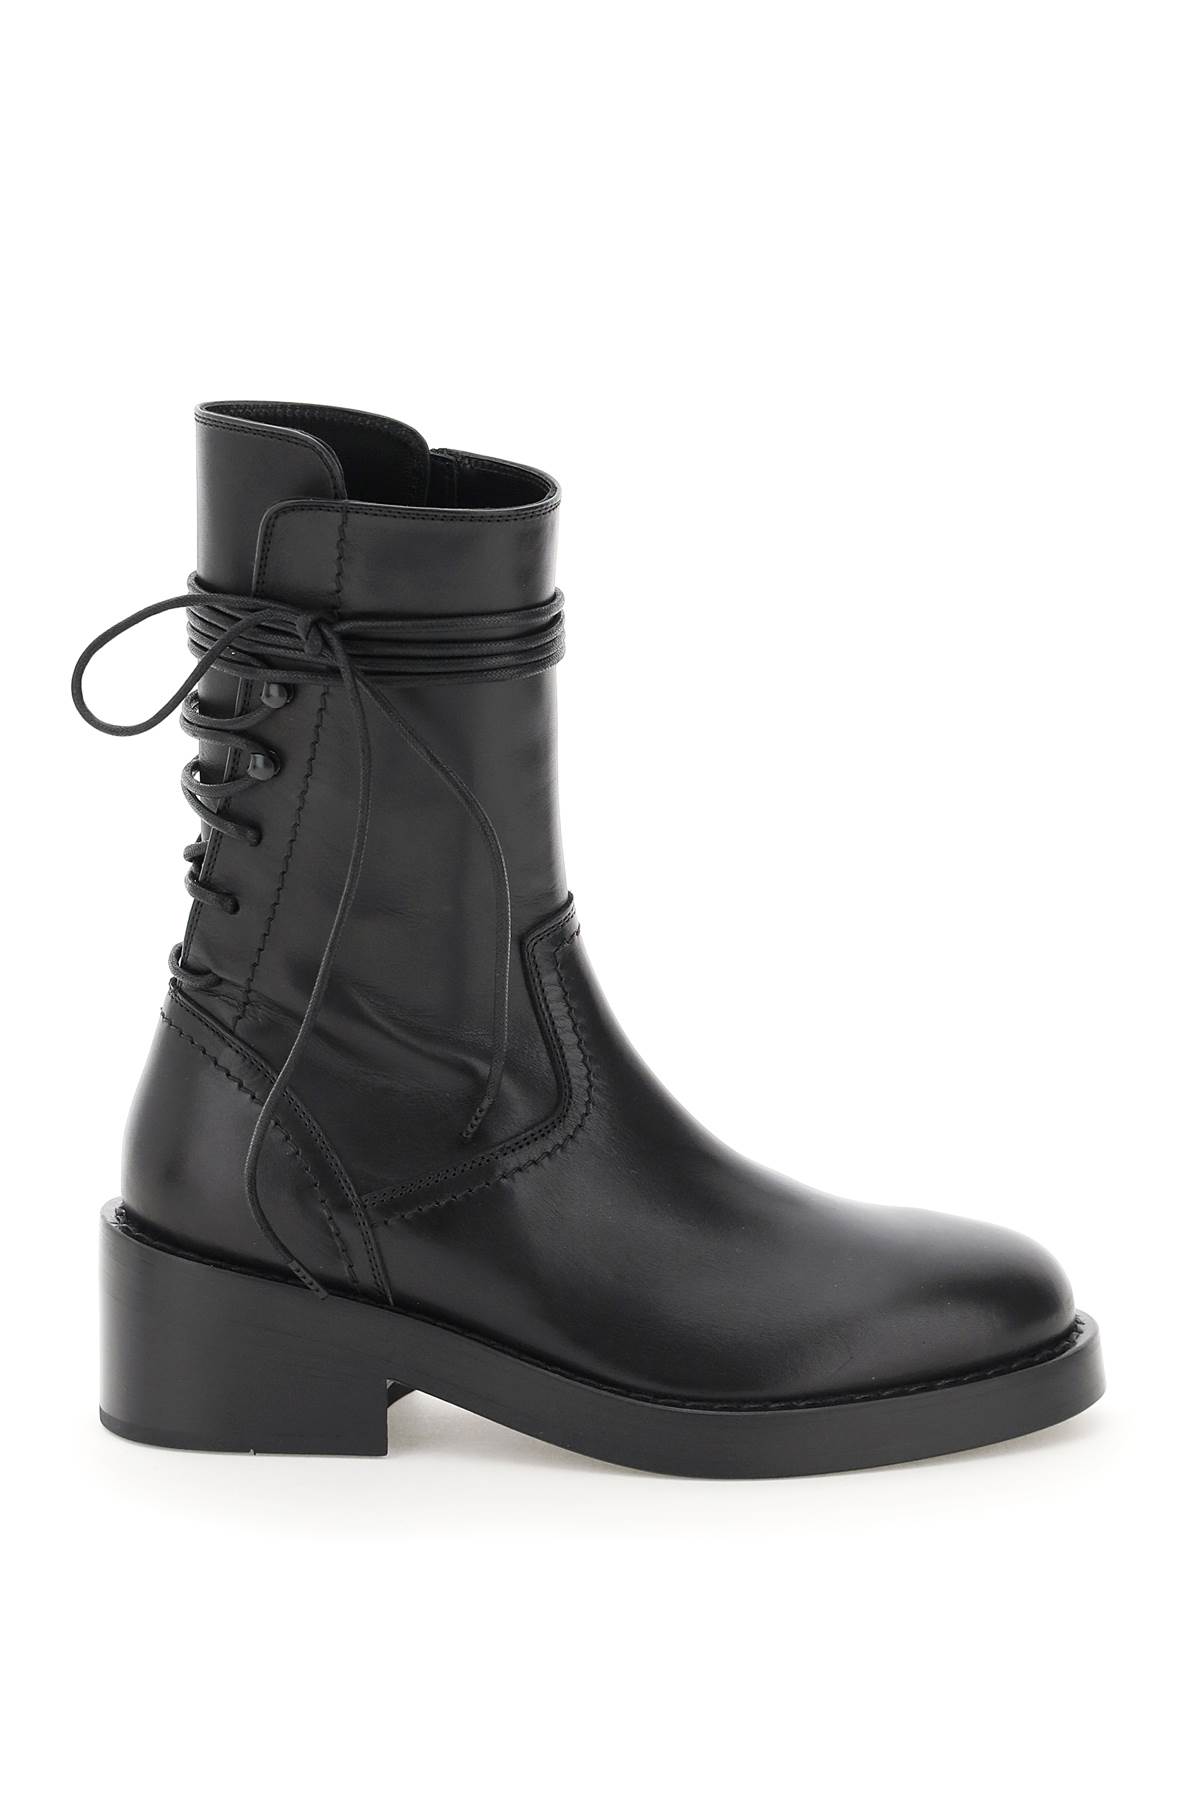 Ann Demeulemeester Henrica Leather Boots